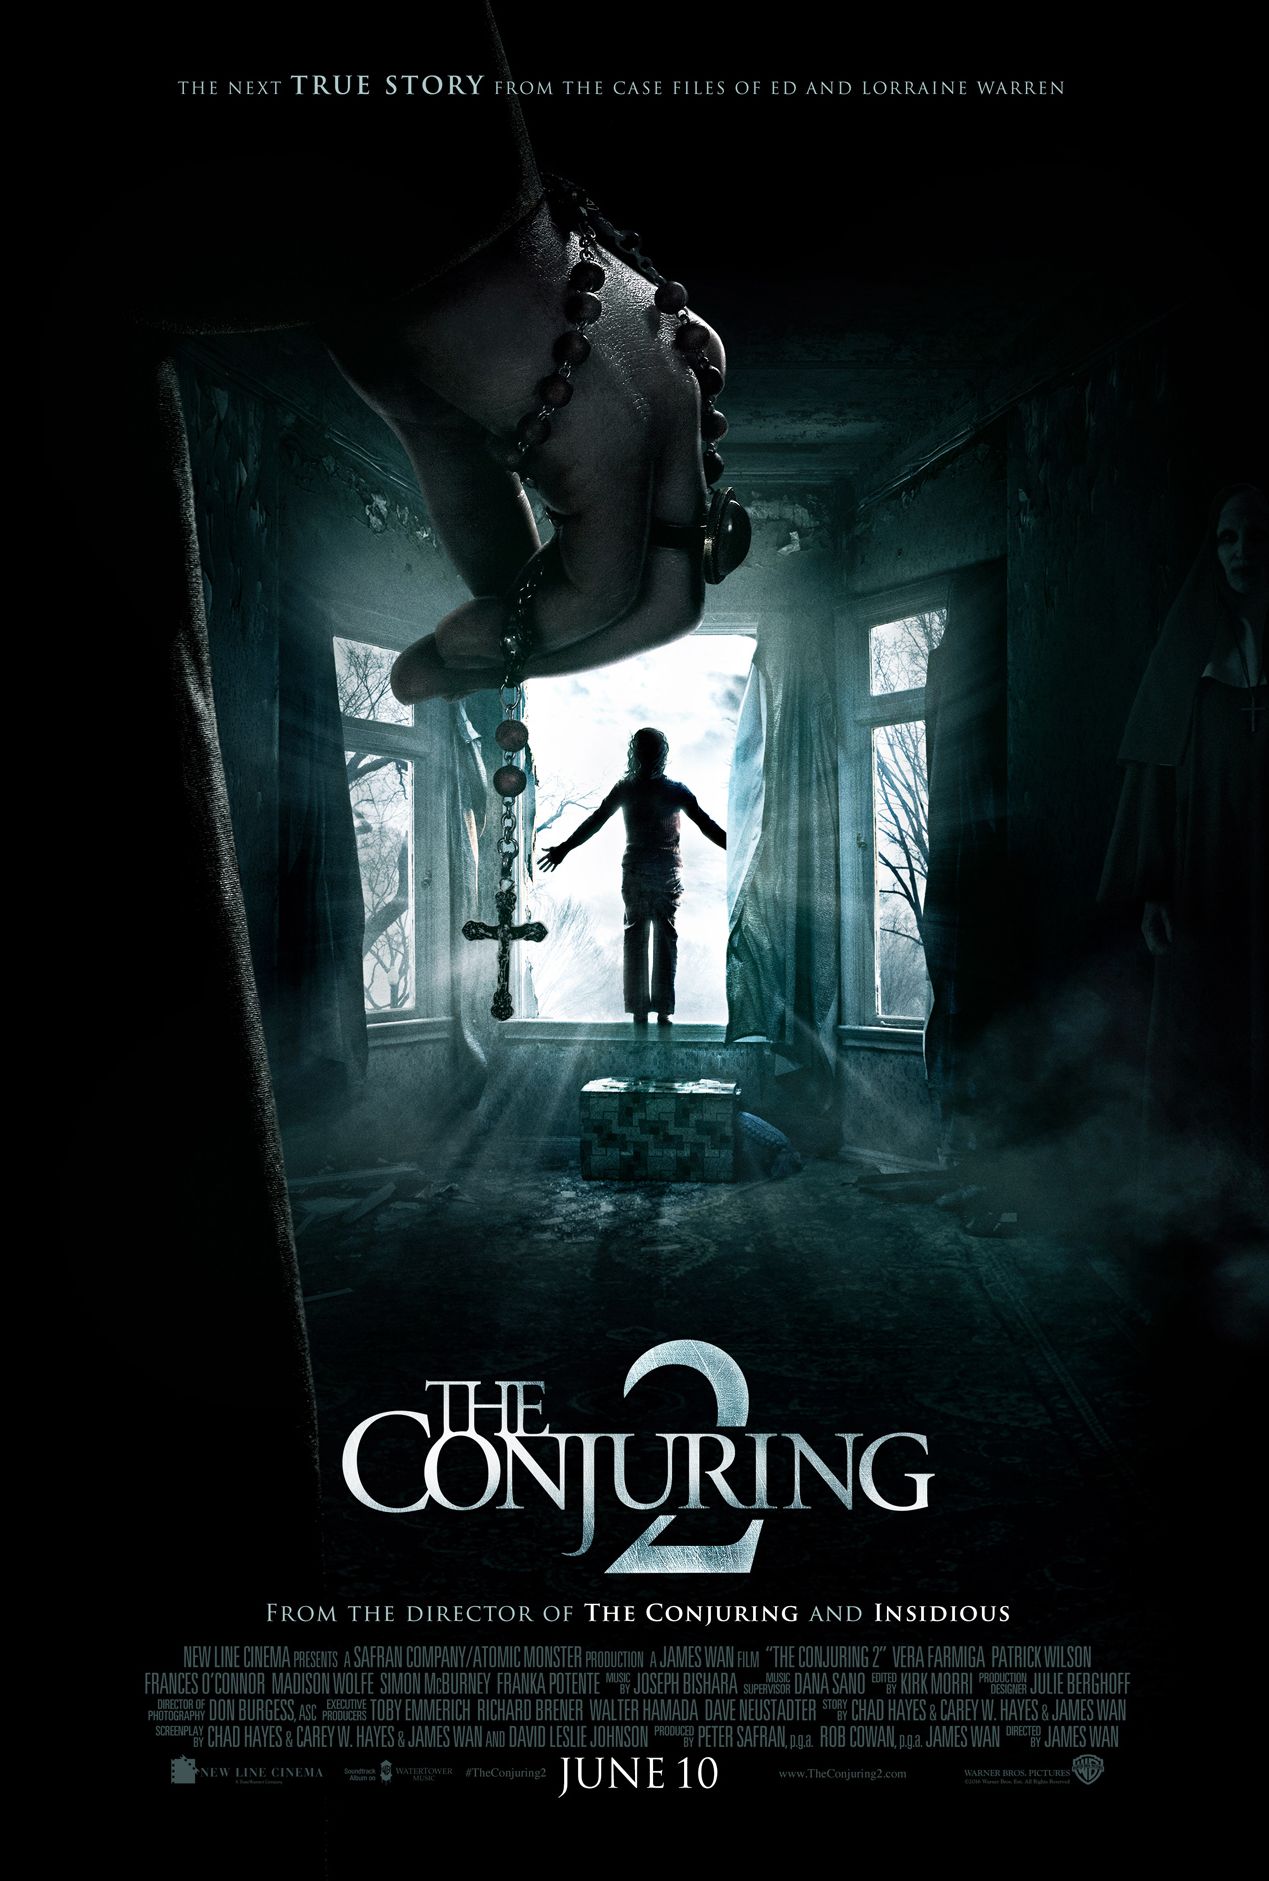 Official poster for The Conjuring 2